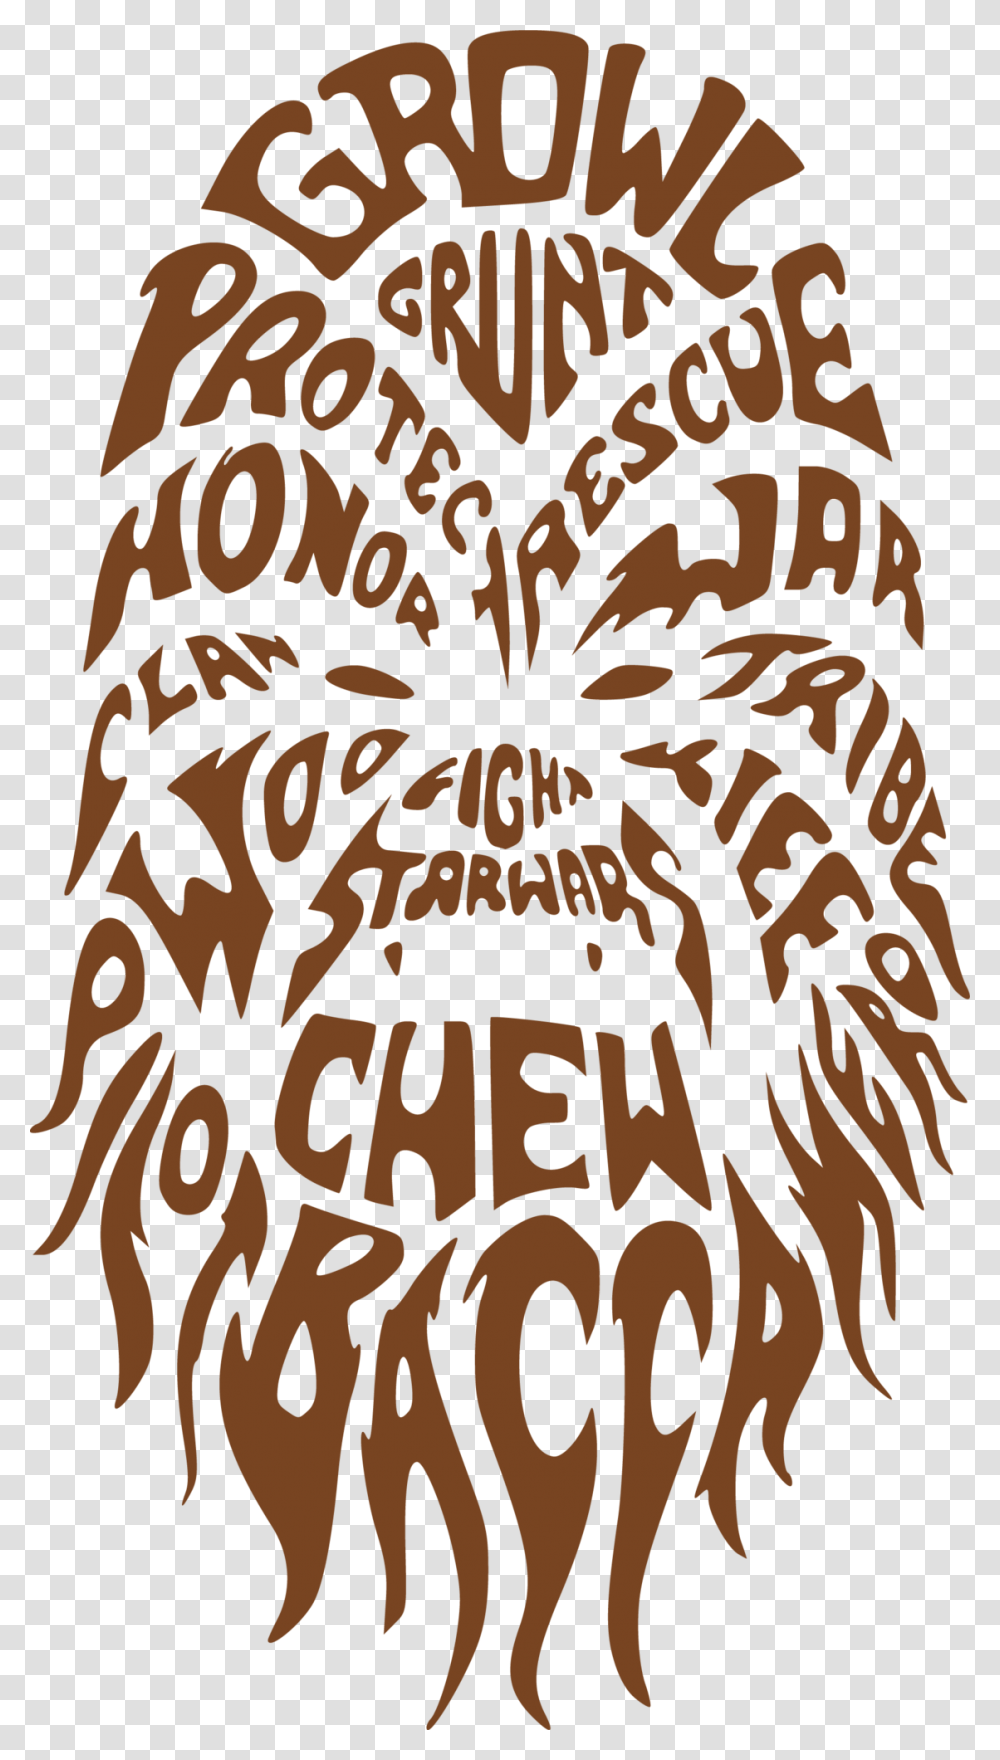 Chewbacca Star Wars Svg Dxf Eps Cut File Cricut And Silhouette Machines Star Wars Cricut, Text, Calligraphy, Handwriting Transparent Png